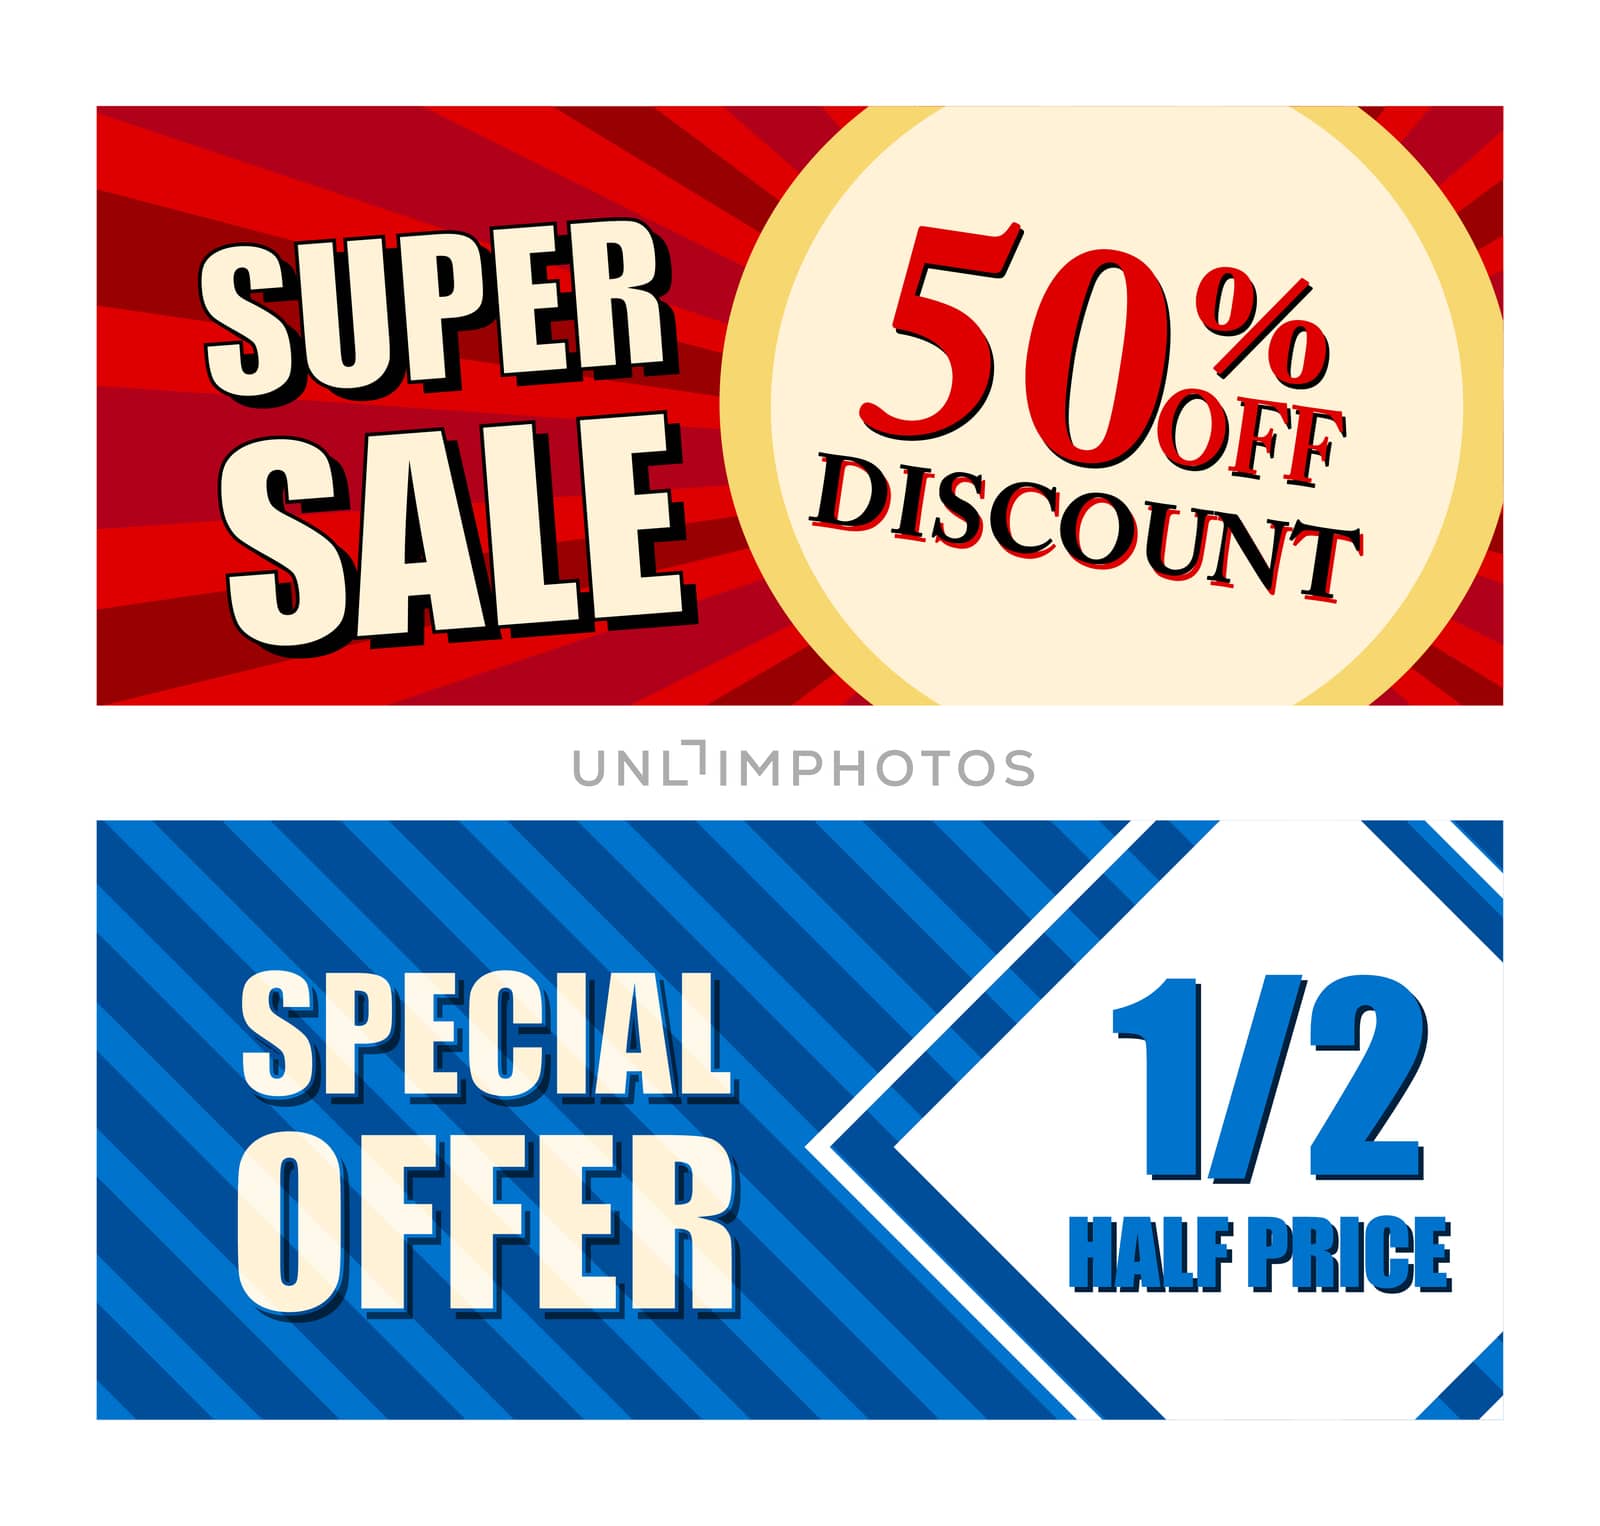 50 percent off discount super sale and special offer half price, by marinini